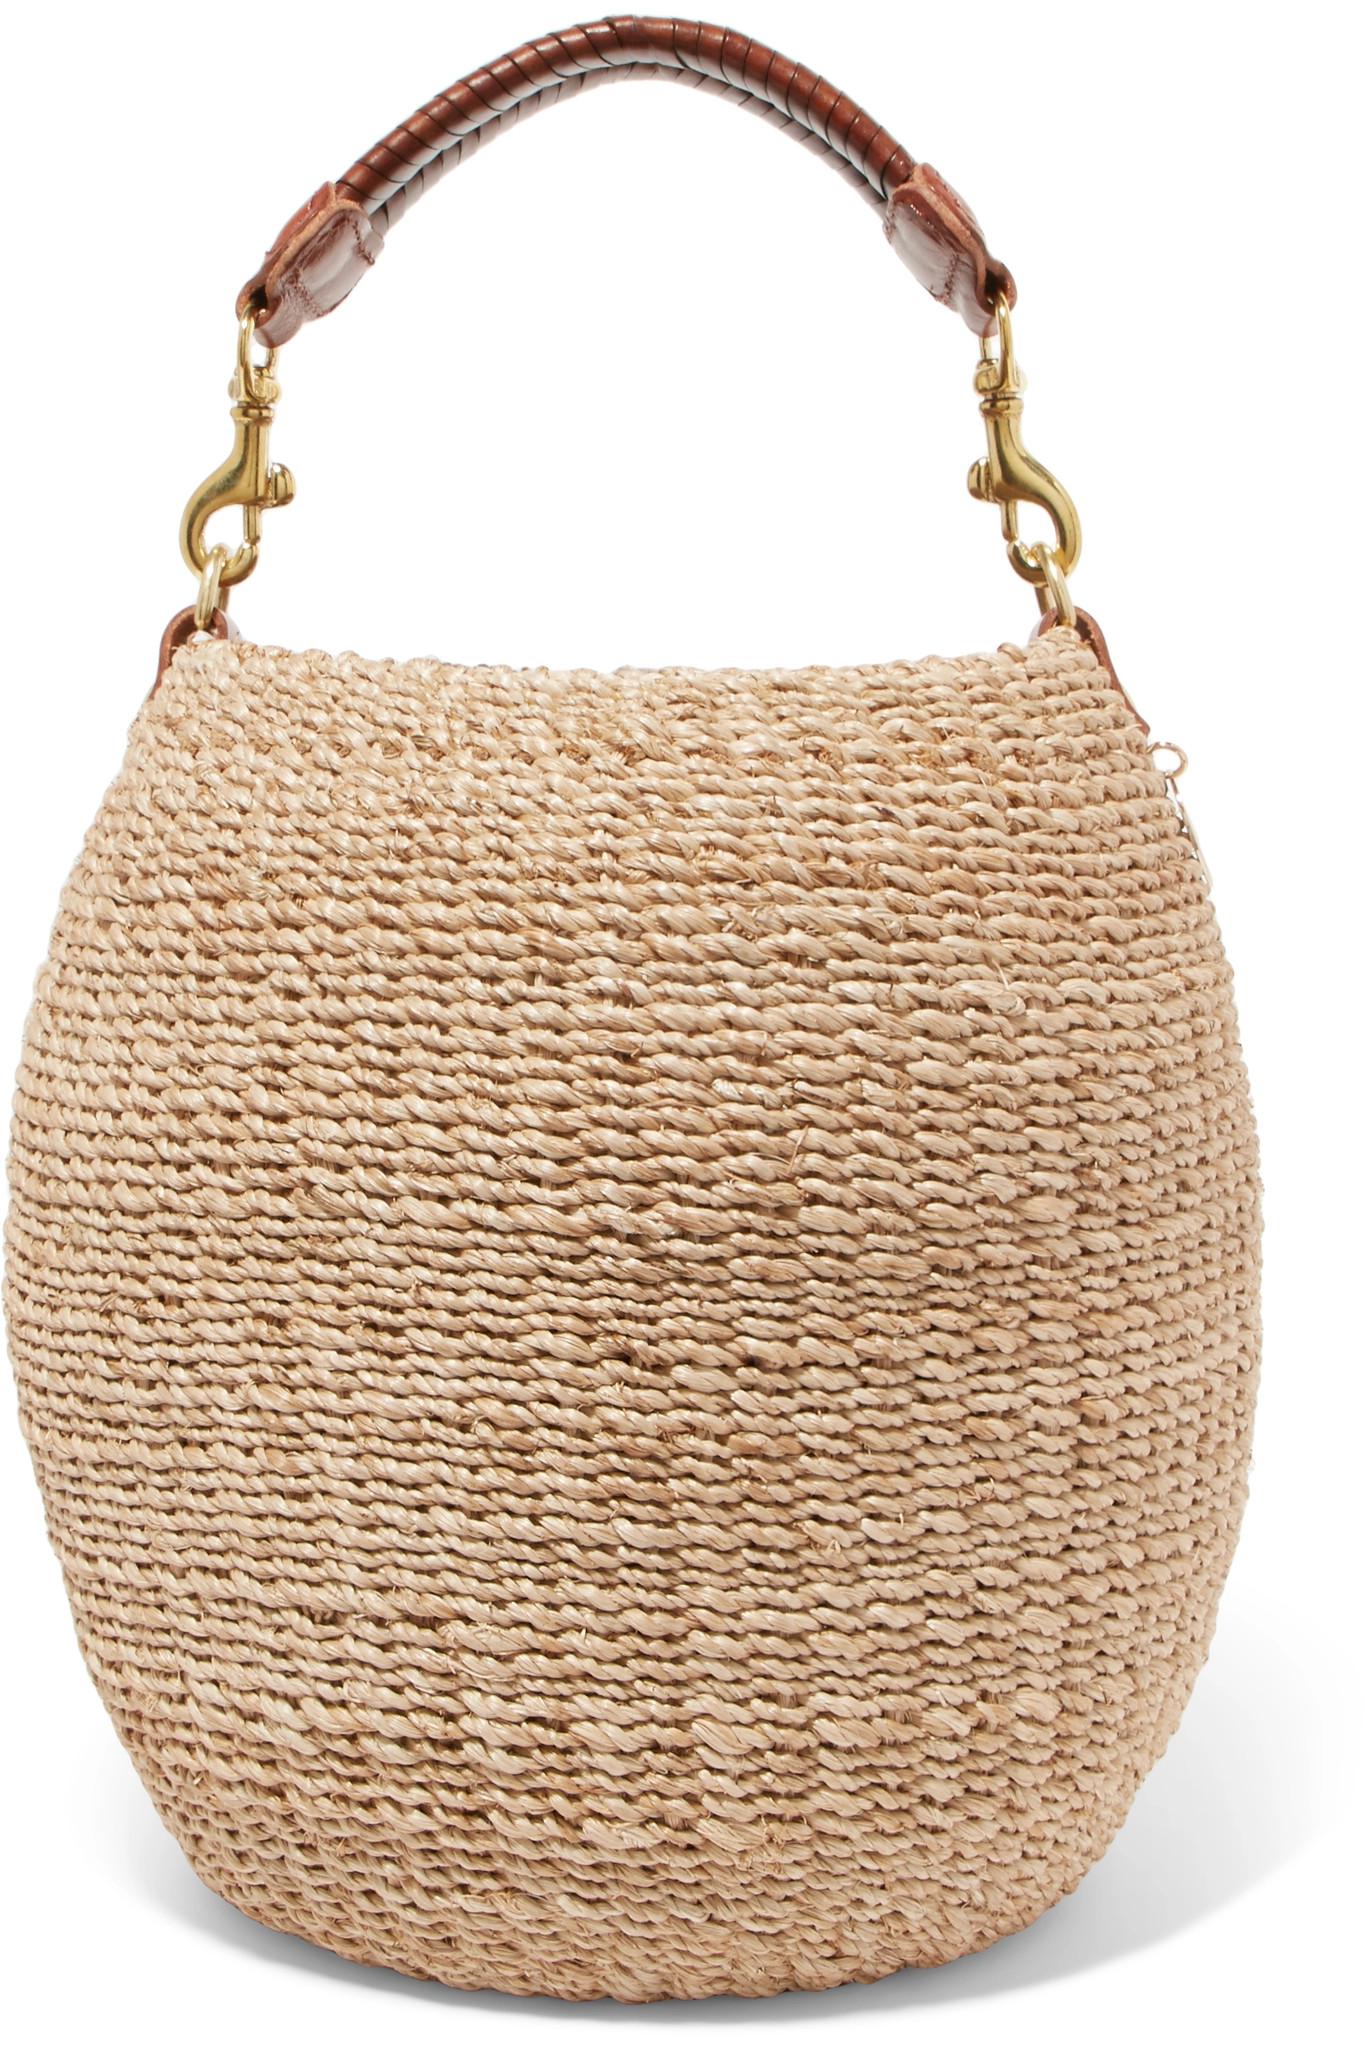 clare v woven leather tote